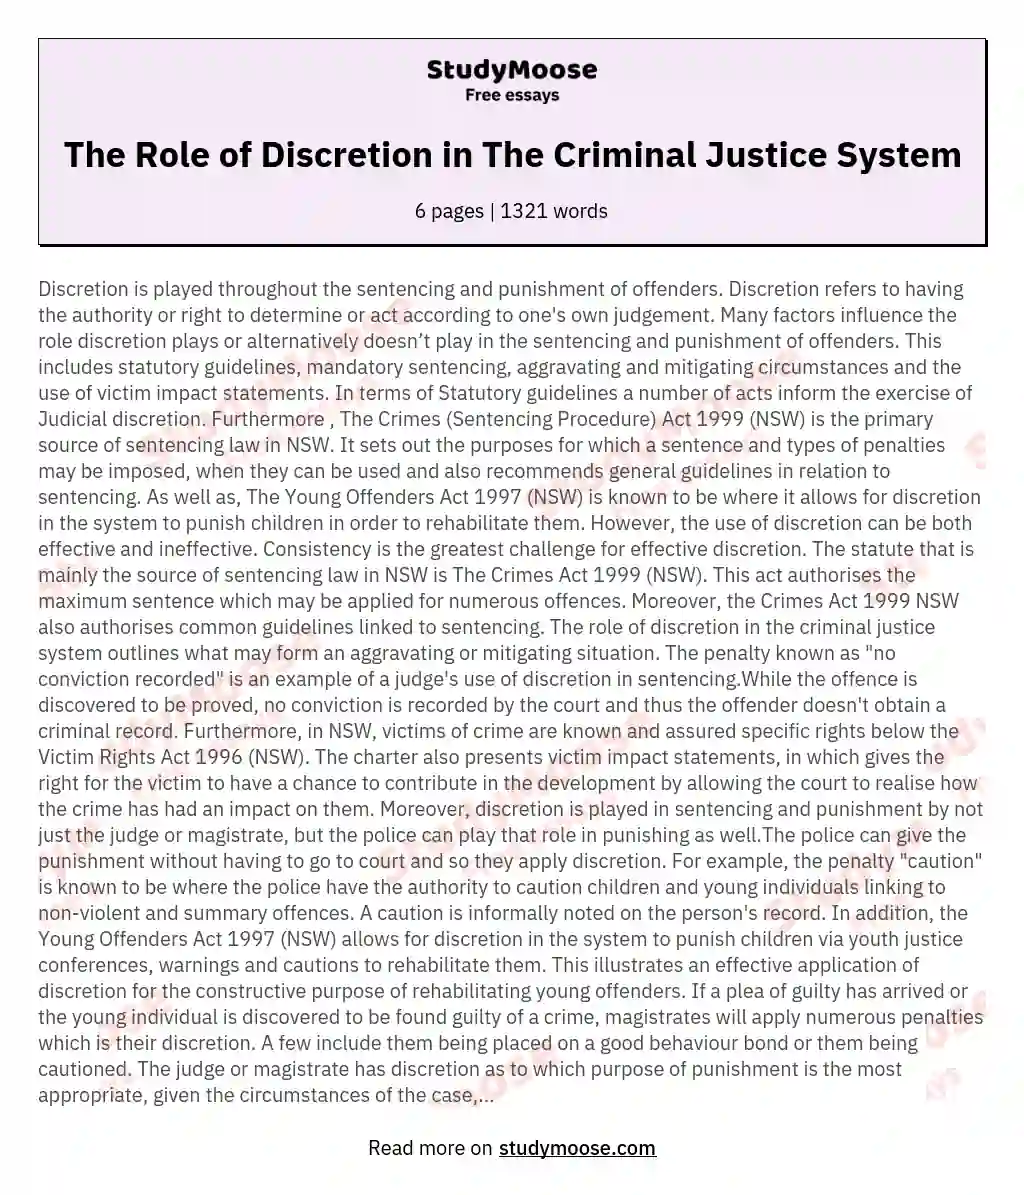 The Role of Discretion in The Criminal Justice System essay